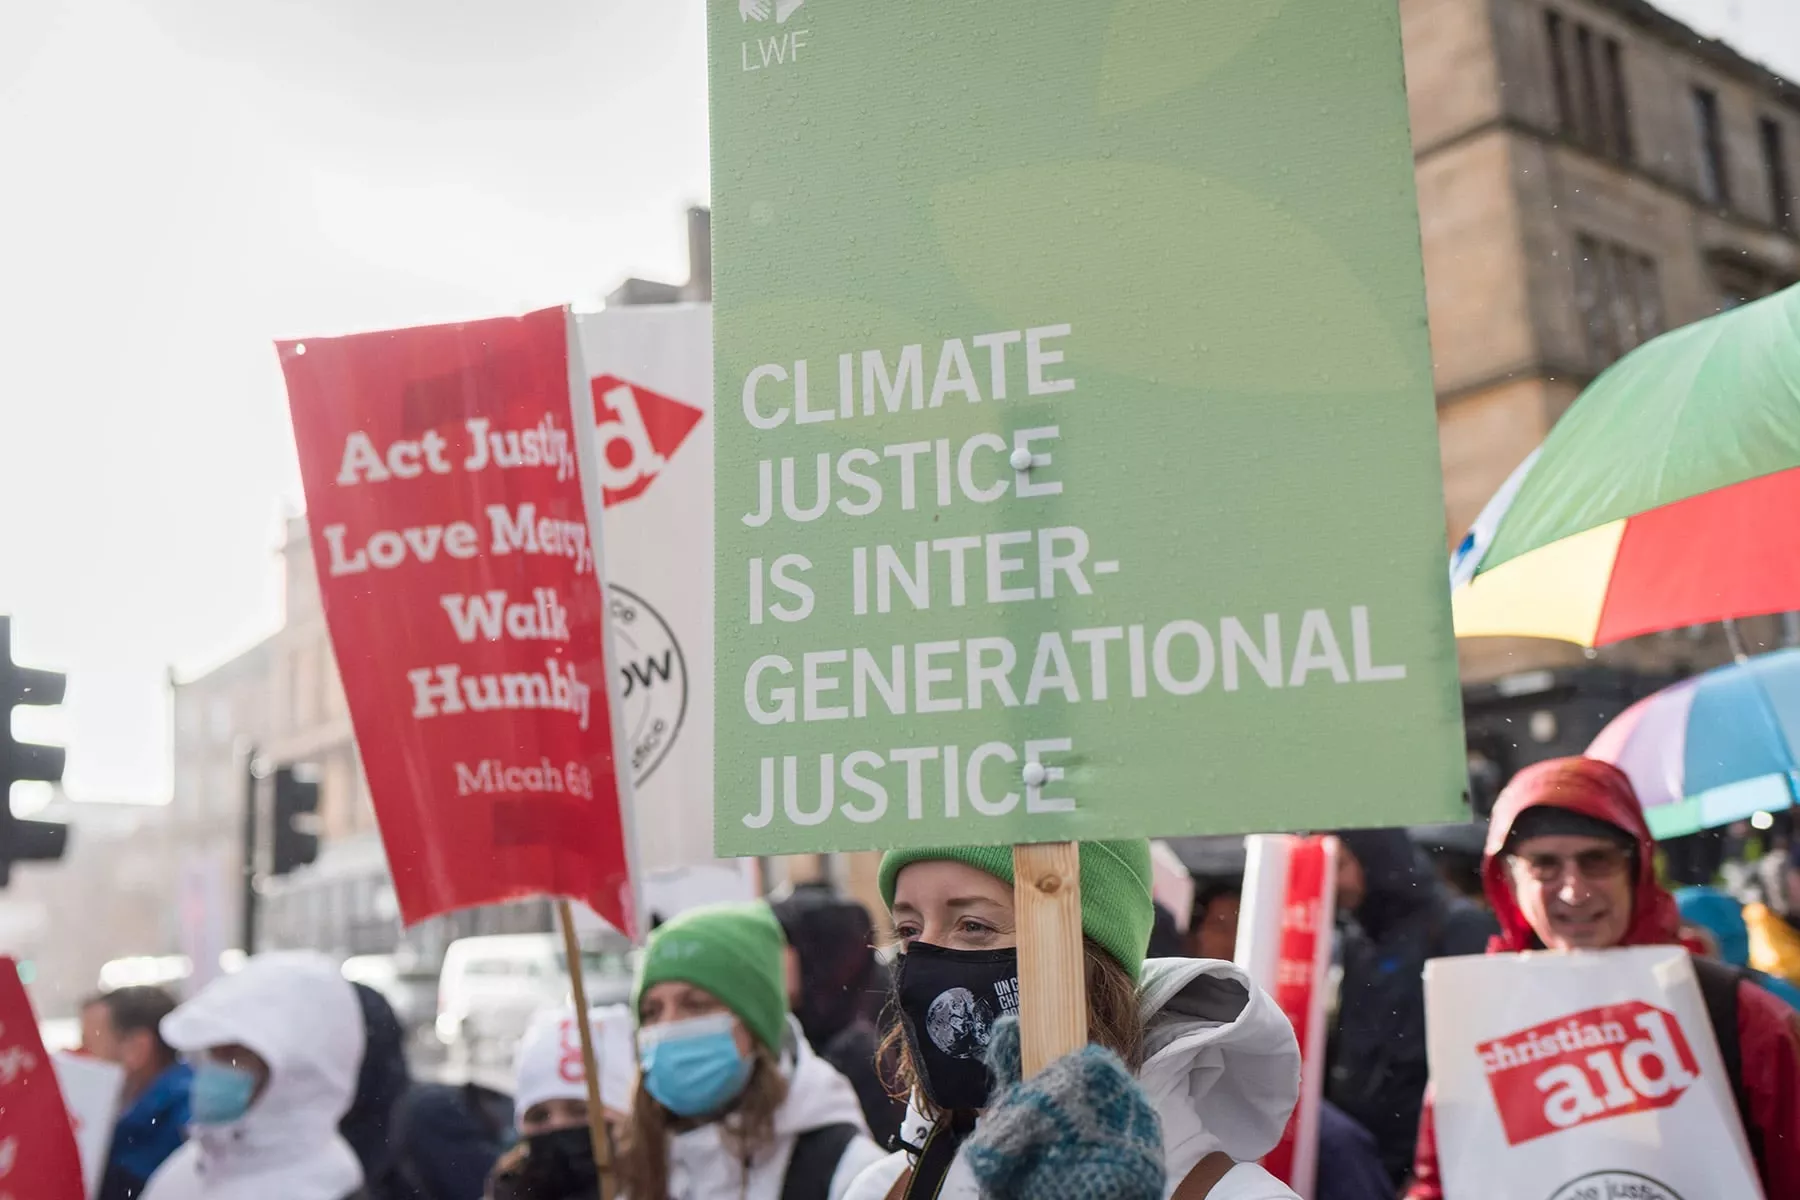 Since 2011, young people have represented the LWF at the UN climate change conferences COP, advocating for climate and intergenerational justice. Last year they also participated in the climate march during COP26 in Glasgow, Scotland. Photo: LWF/Albin Hillert